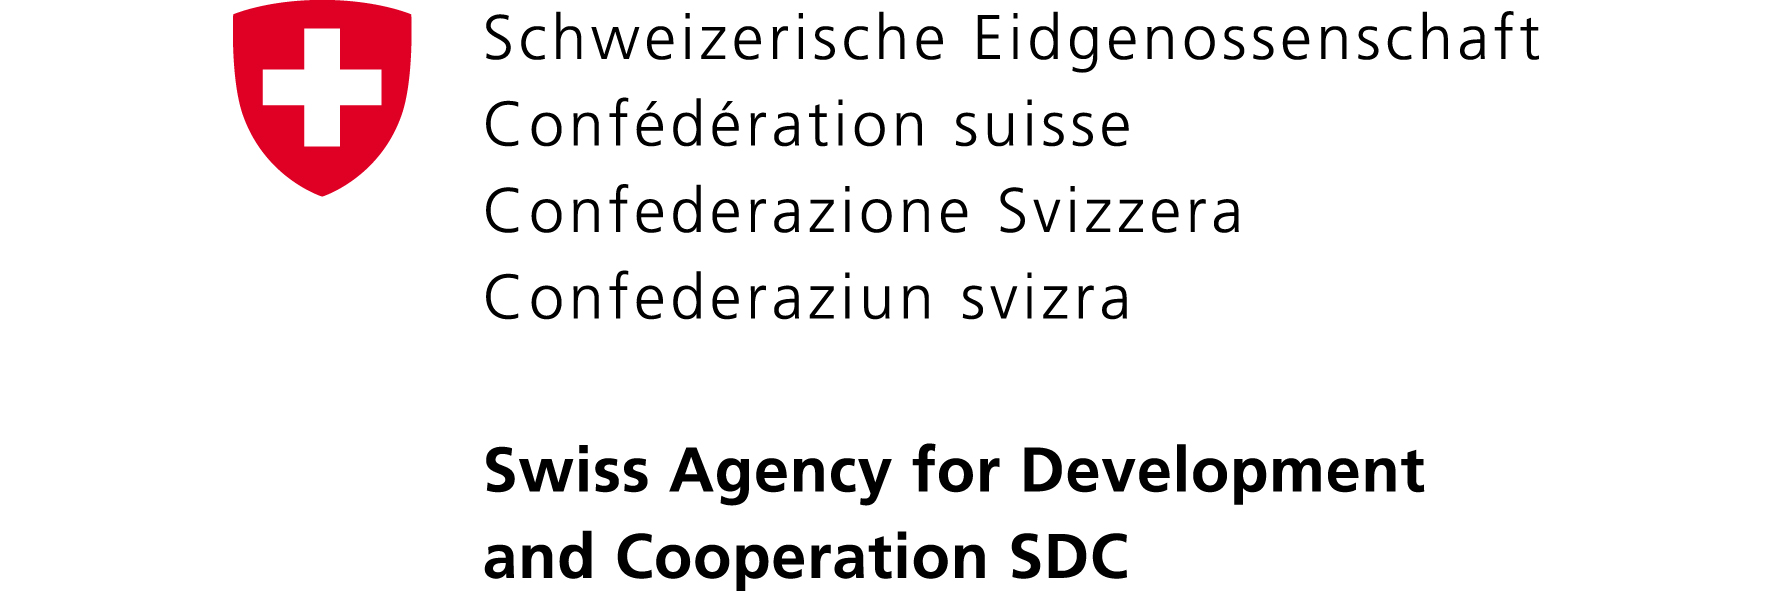 sdc-swiss-agency-for-development-and-cooperation-logo.jpg